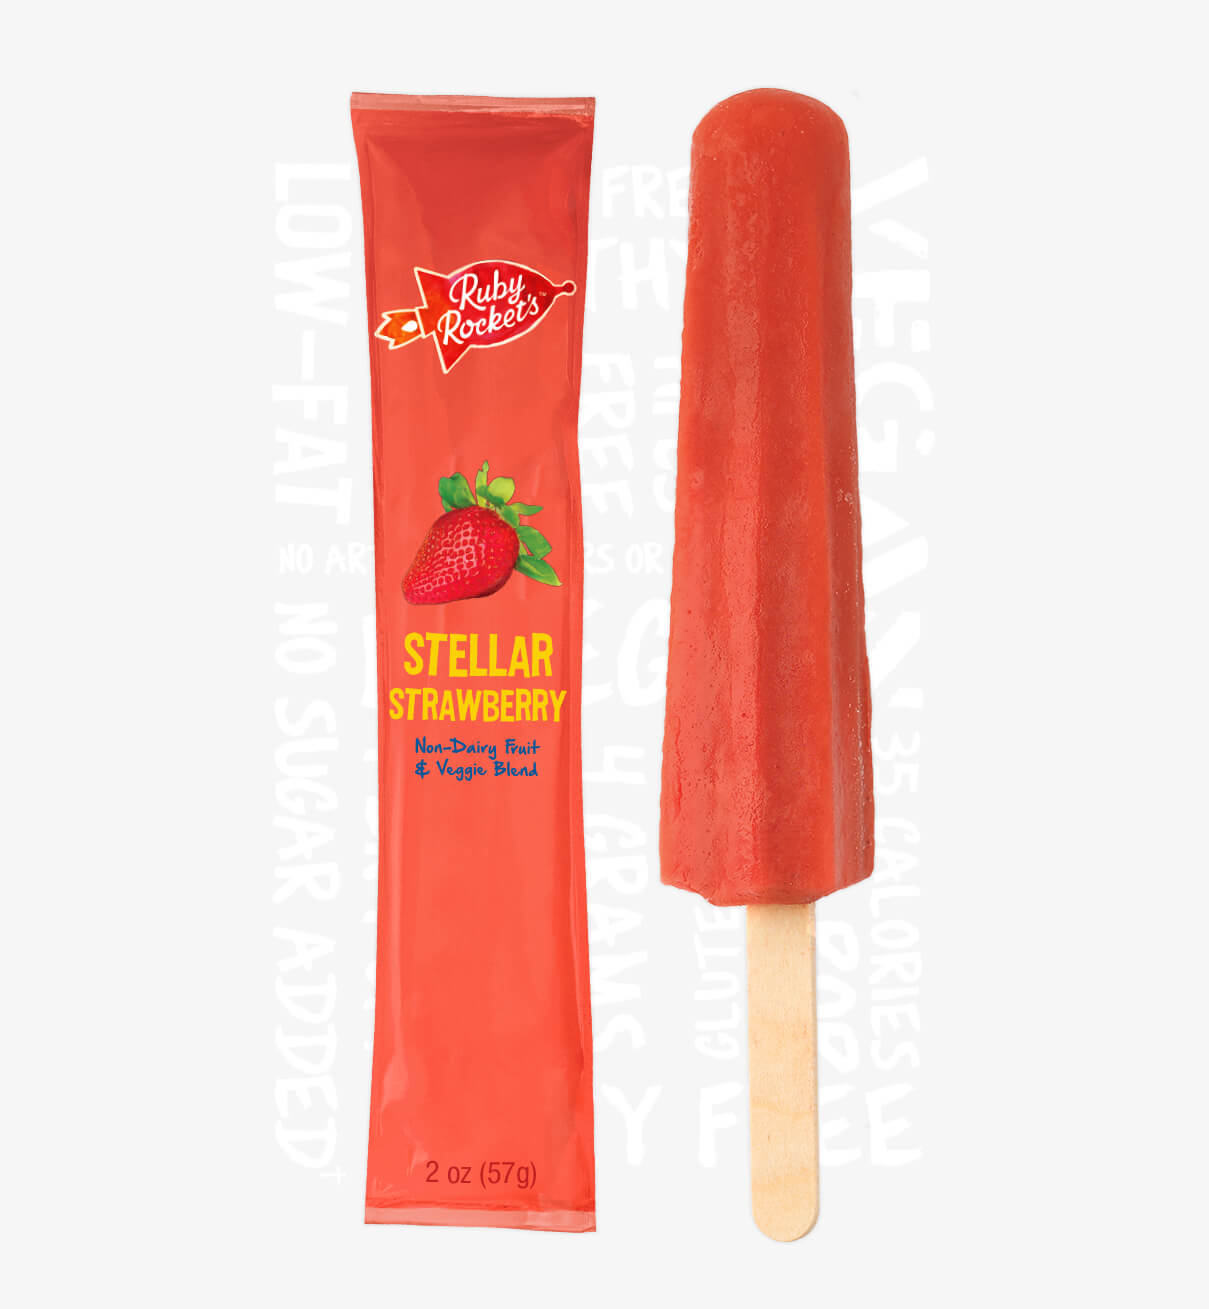 Ruby Rockets website design to highlight popsicle product packaging with a quirky hand-drawn typography lockup.